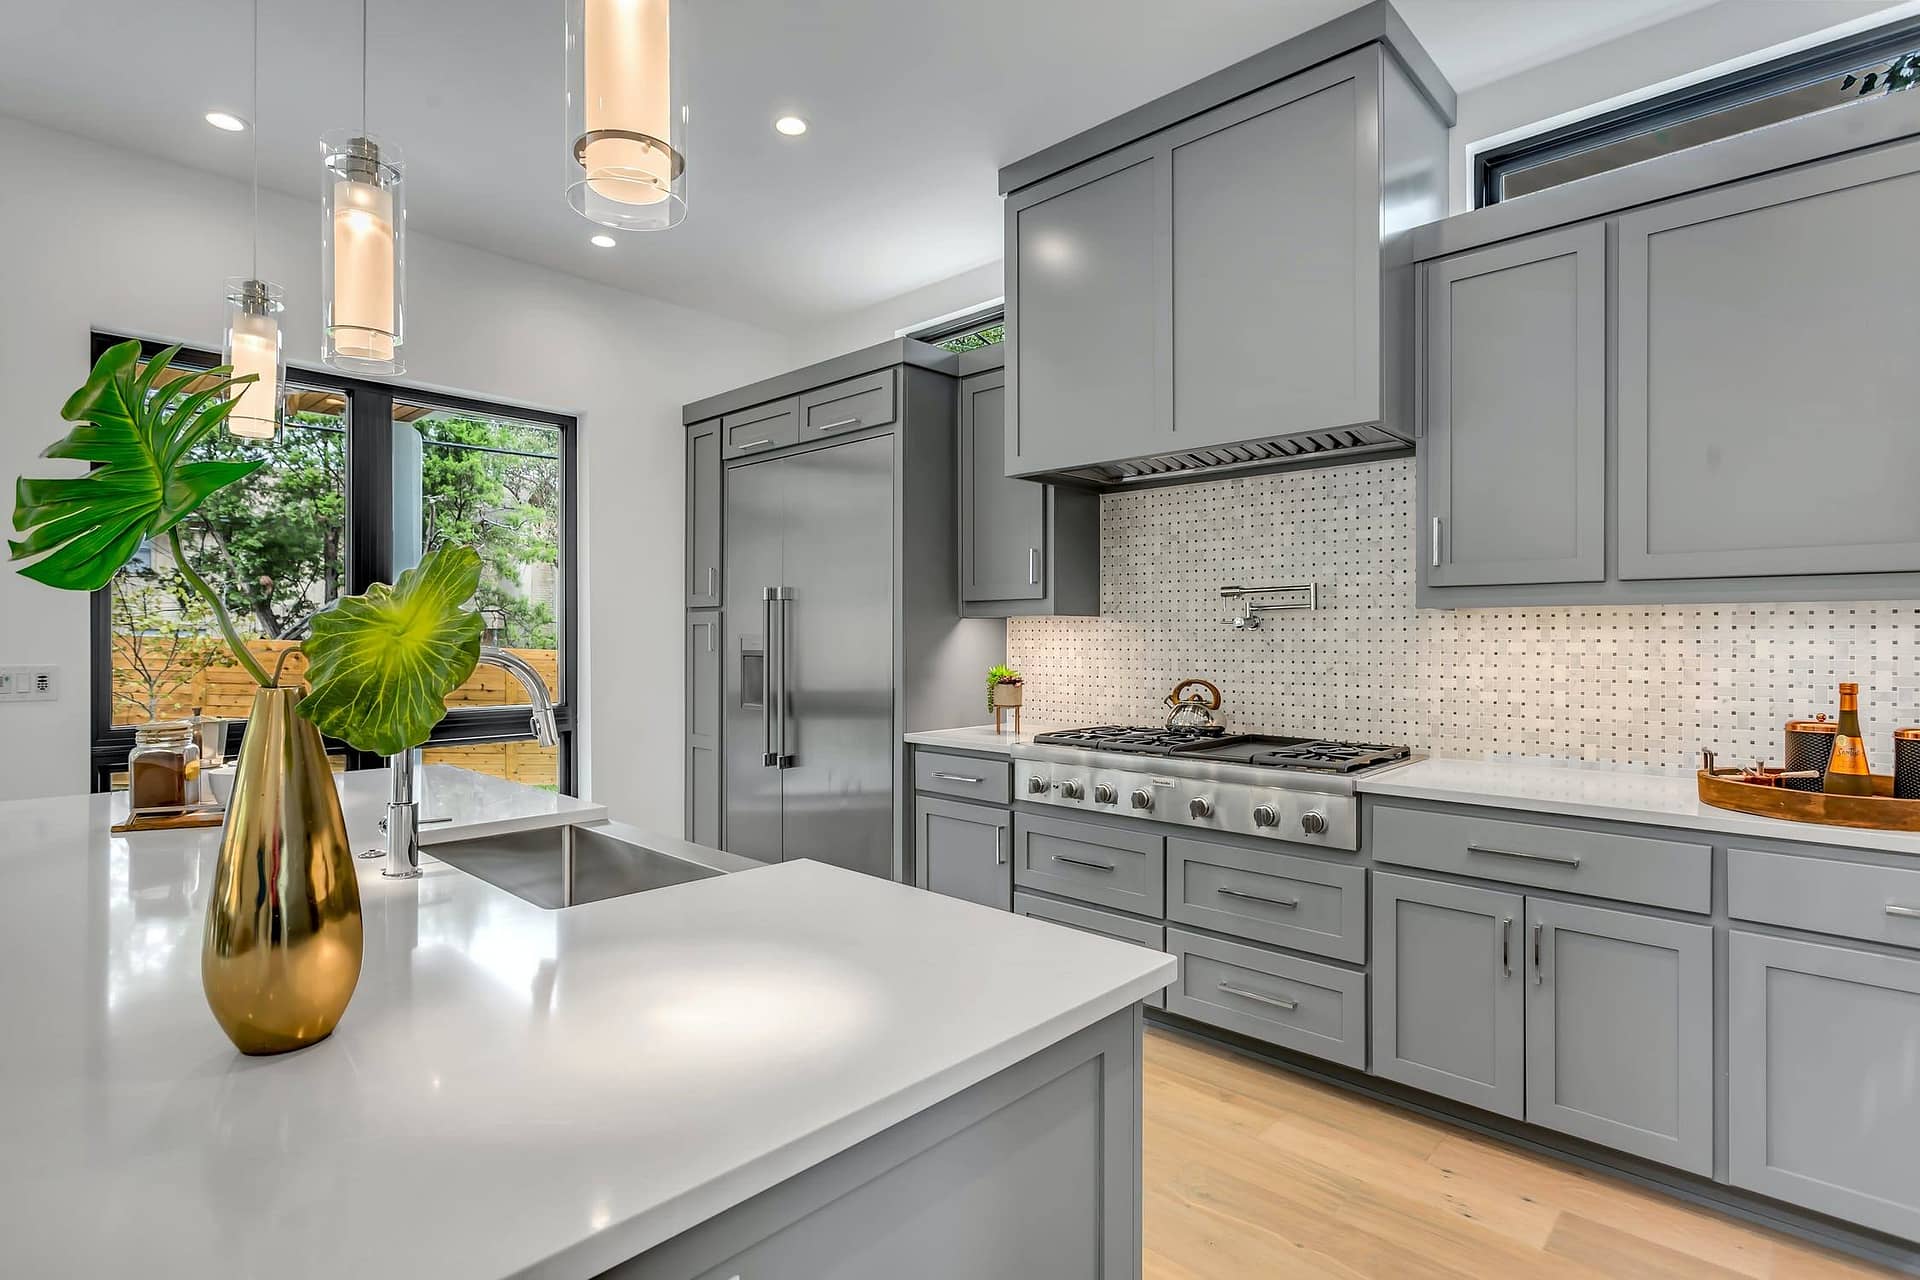 Kitchen remodel in Grey tones with Quartz counters.